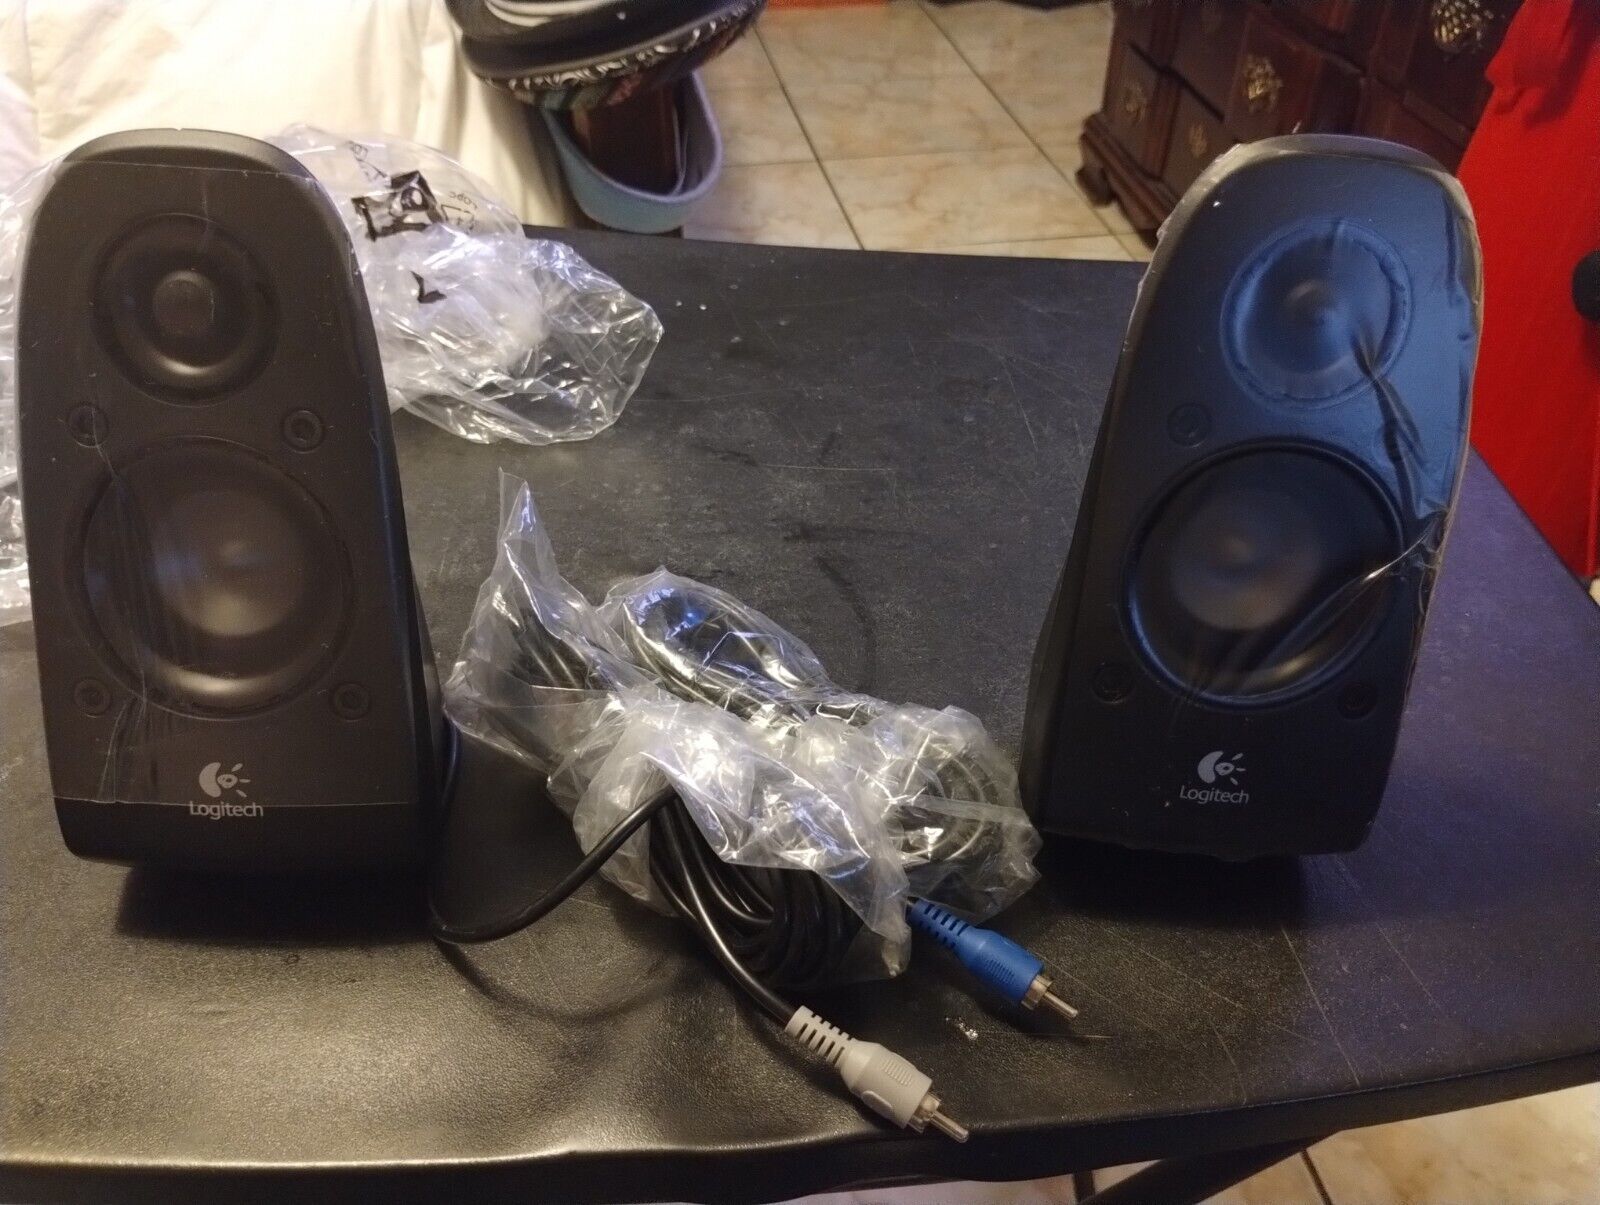 NEW Pair of Logitech Satellite Speakers for Sound System  Blue and Gray- No Sub